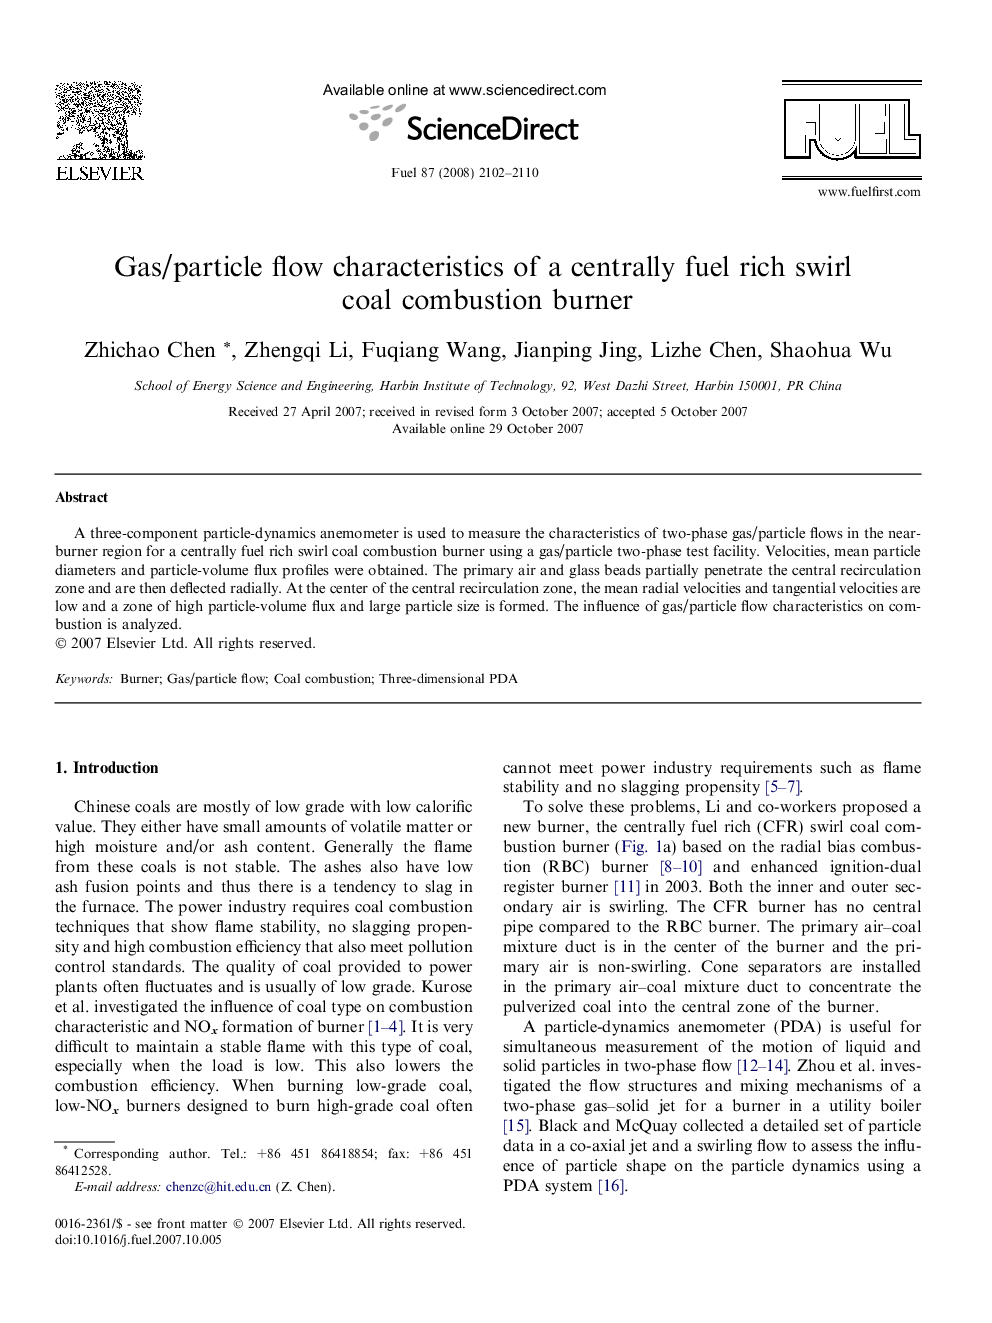 Gas/particle flow characteristics of a centrally fuel rich swirl coal combustion burner